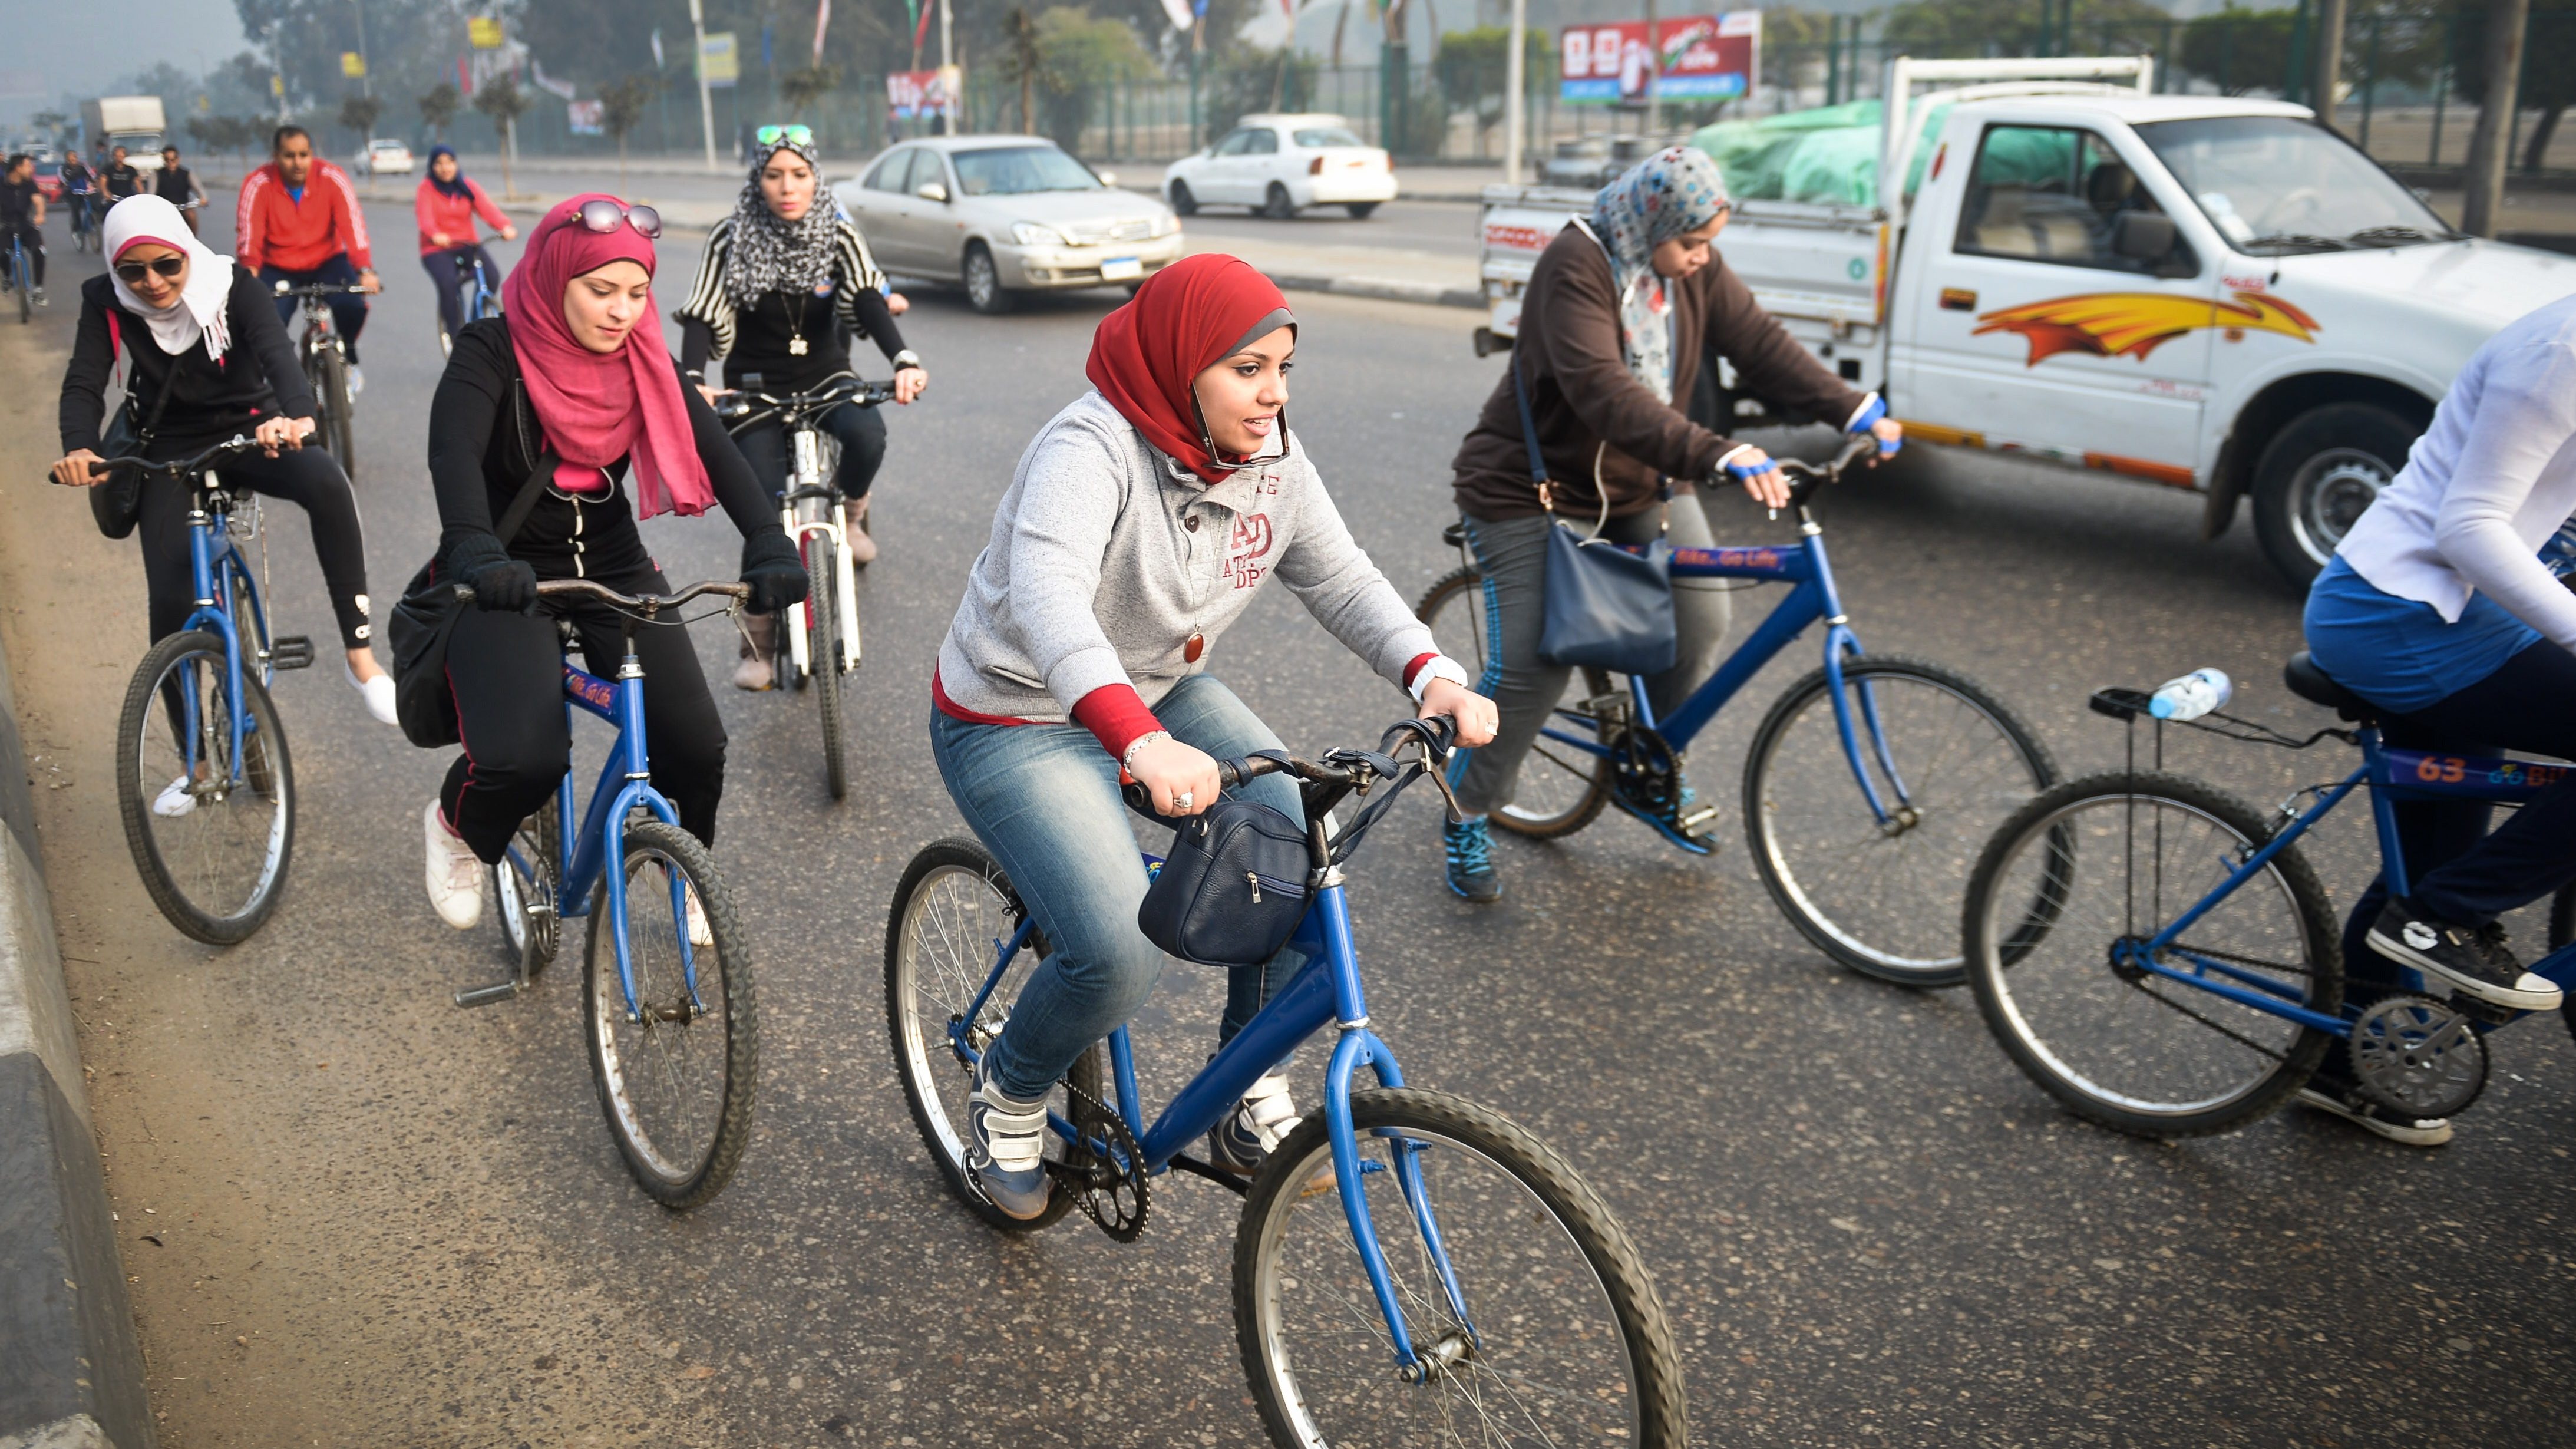 Cairo Climate Talks to Discuss Gender and Sustainable Transportation